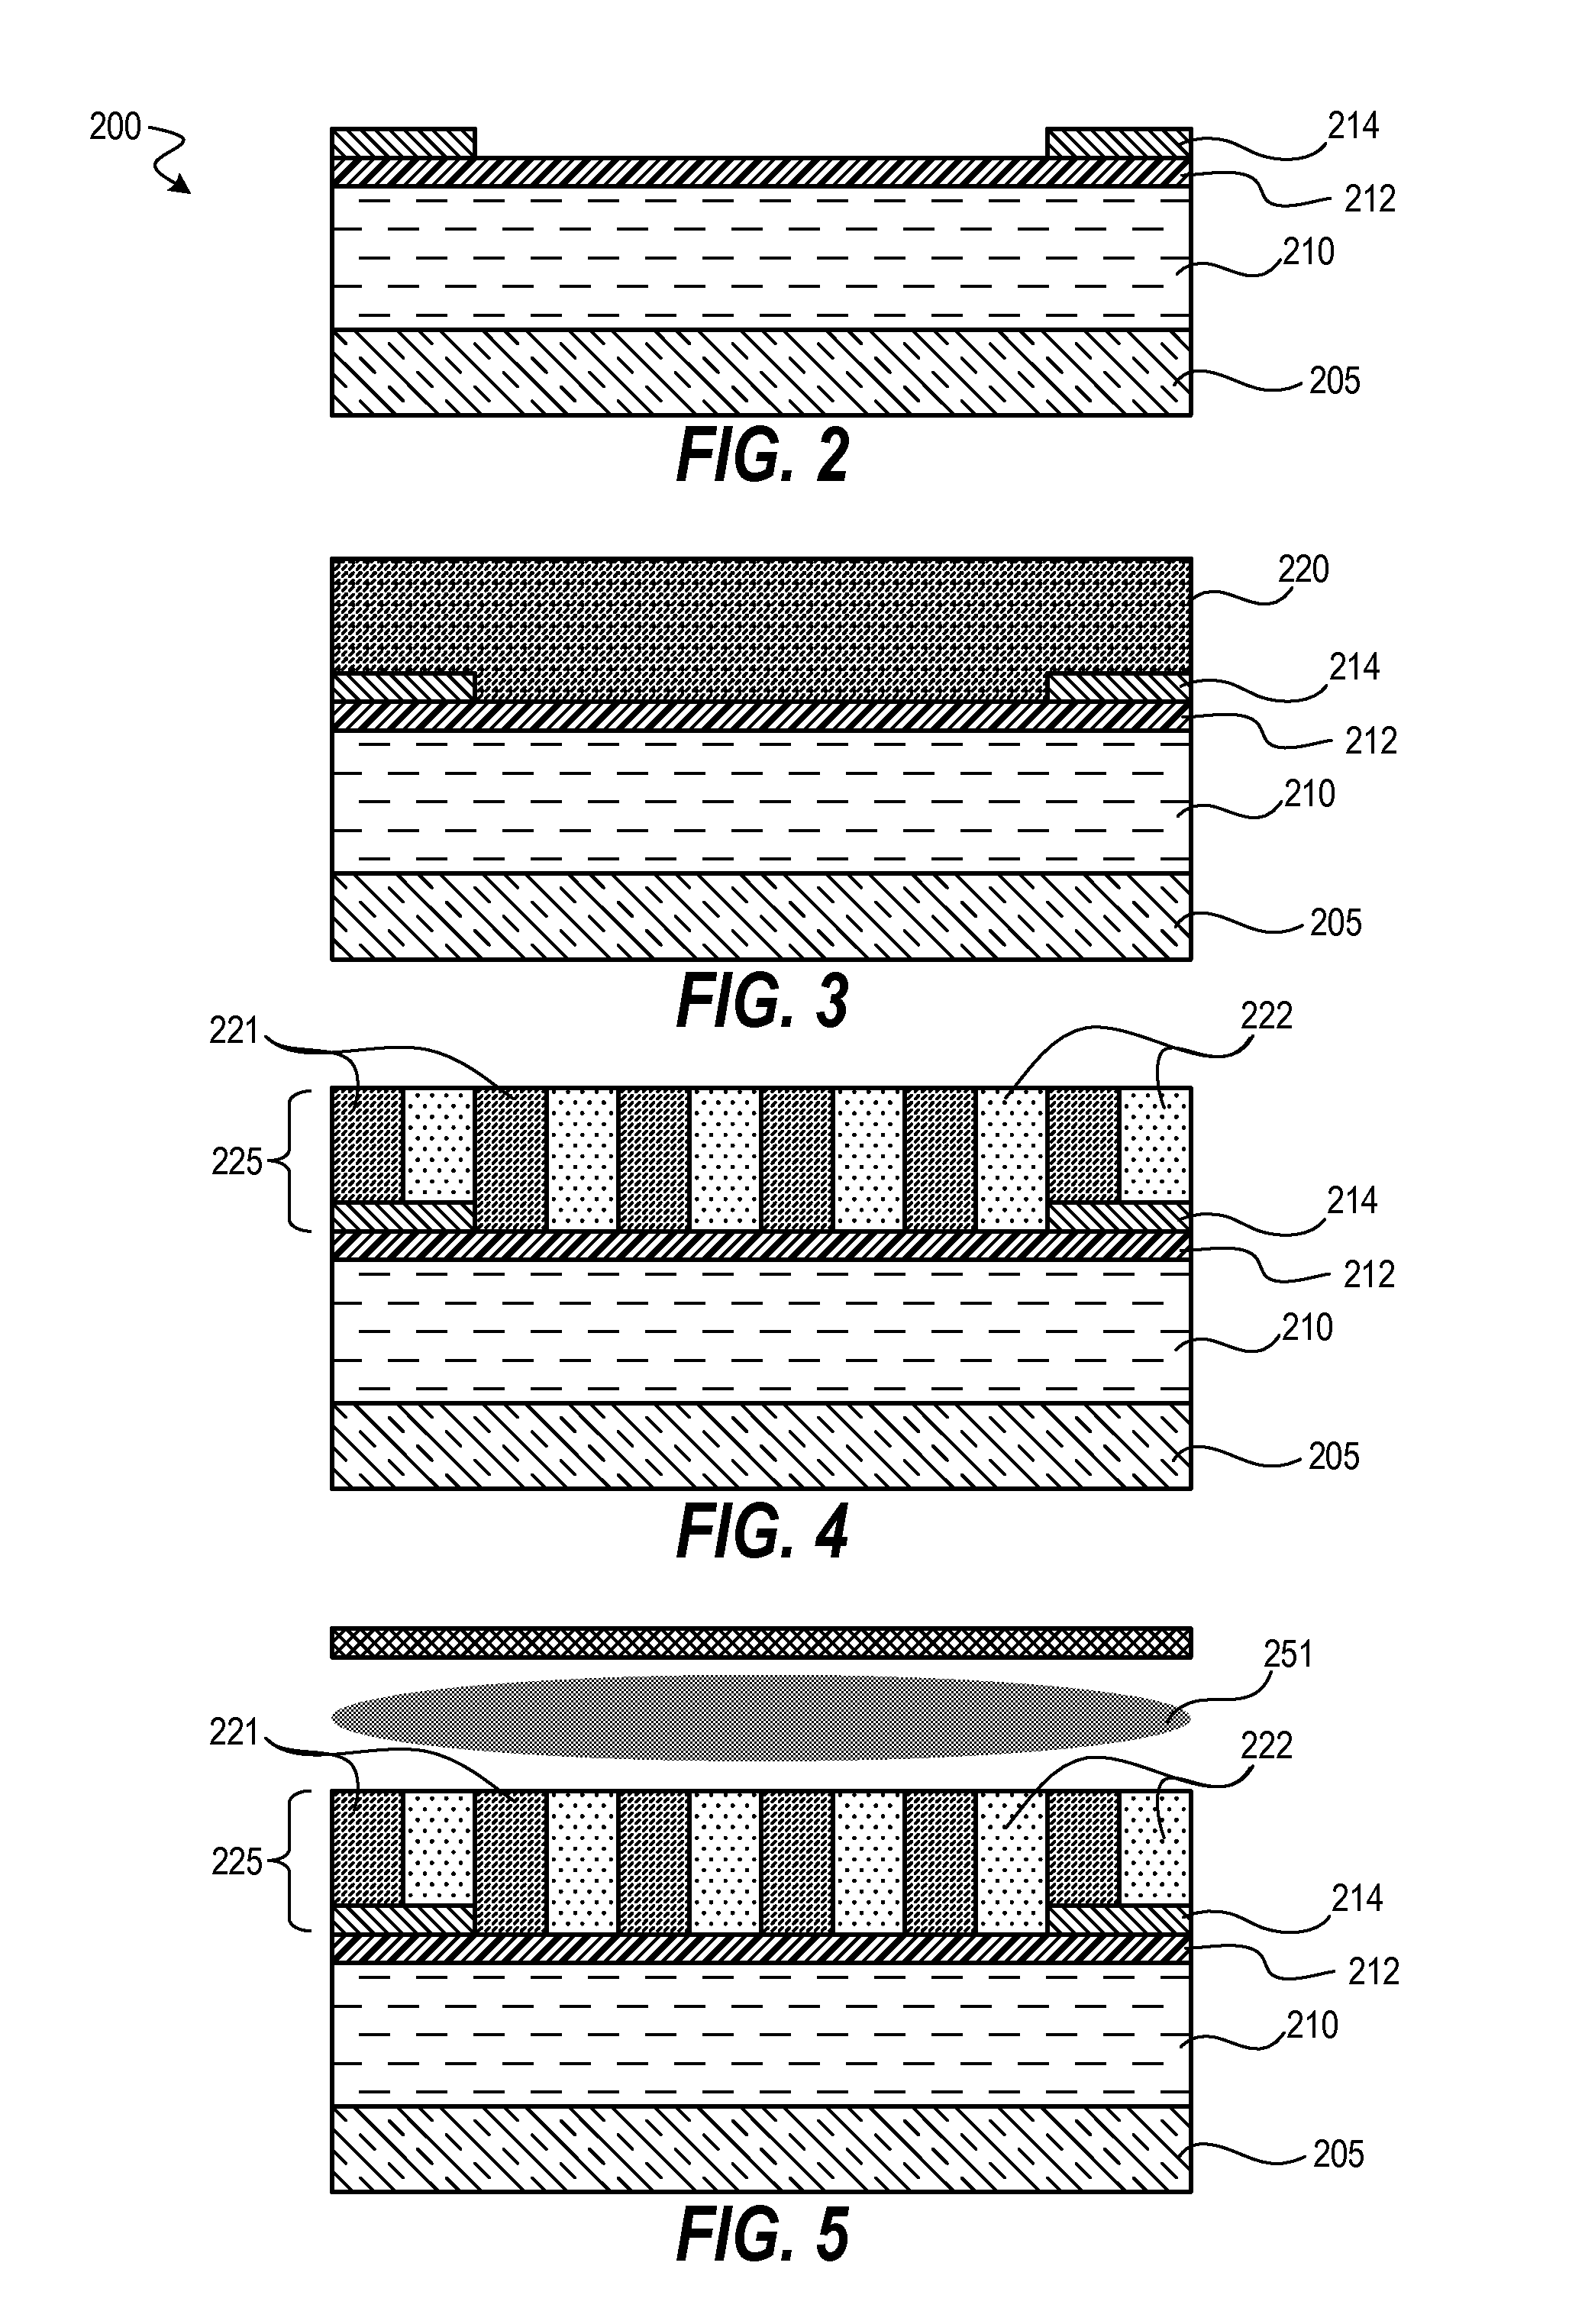 Method for Directed Self-Assembly and Pattern Curing